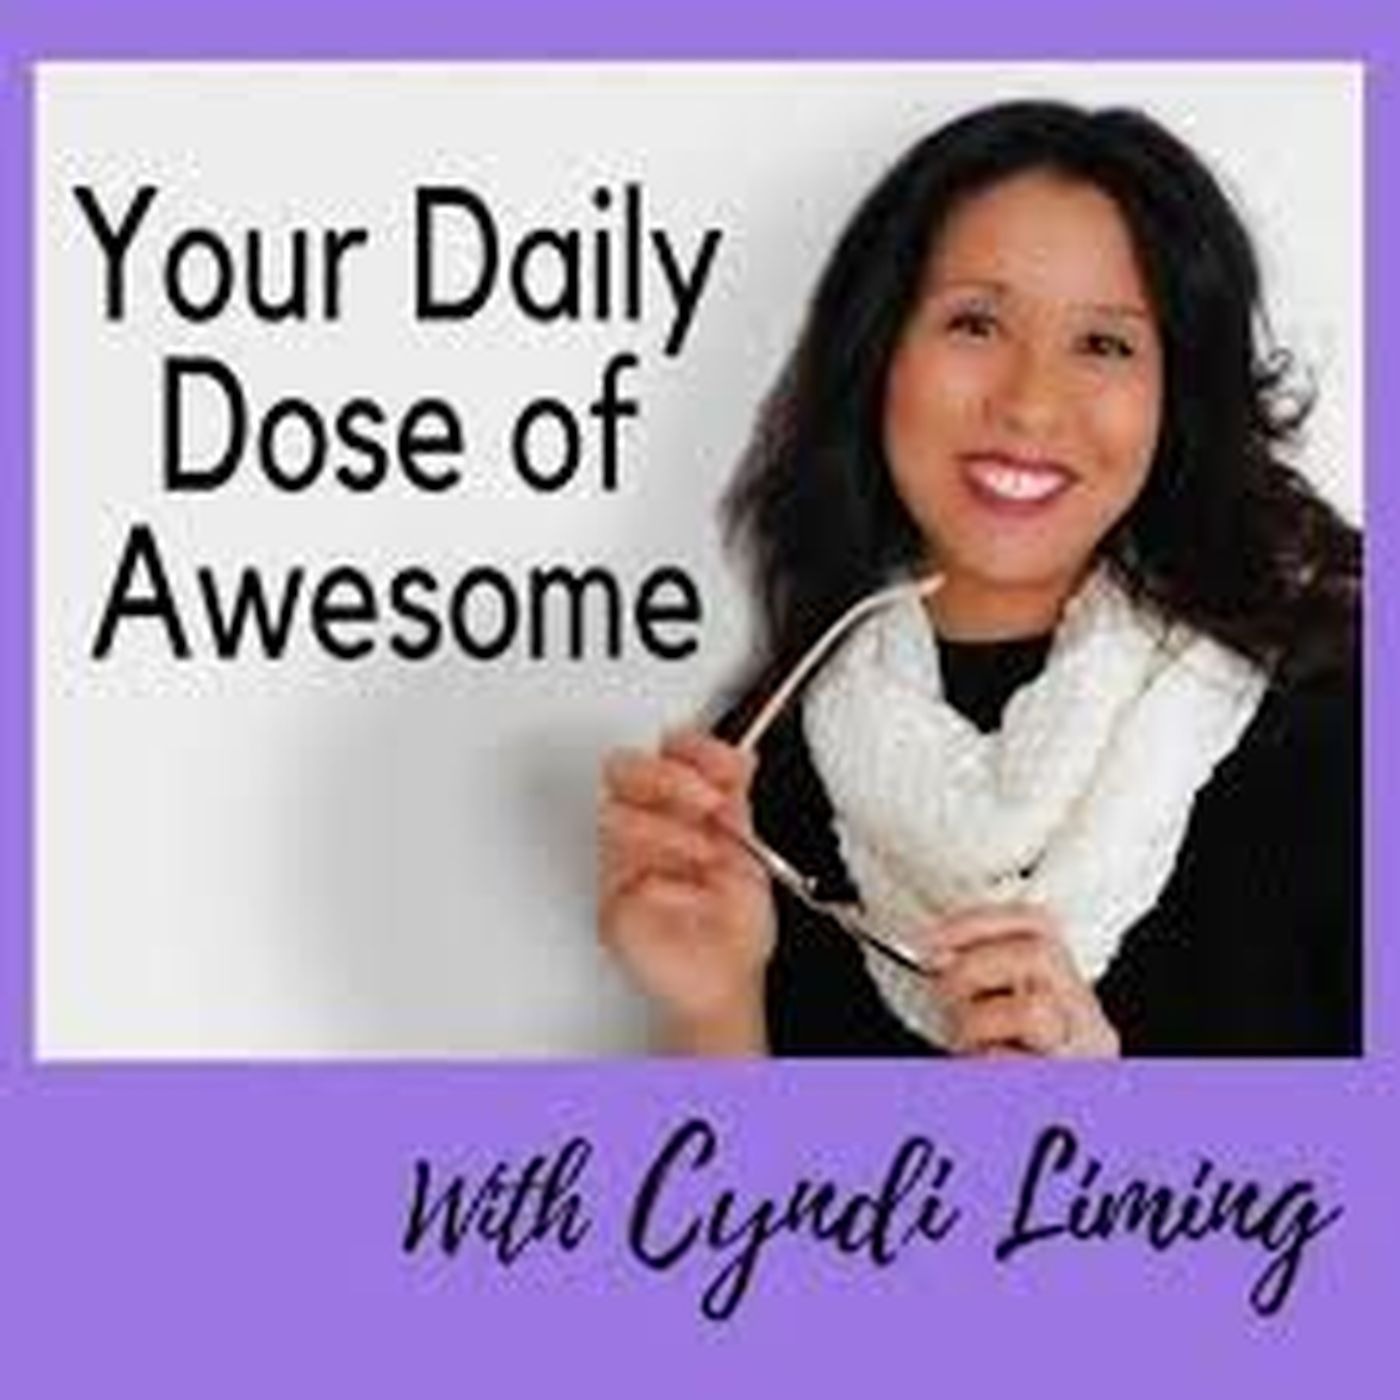 Ep. 113: New Year, New You... Conquering Goals